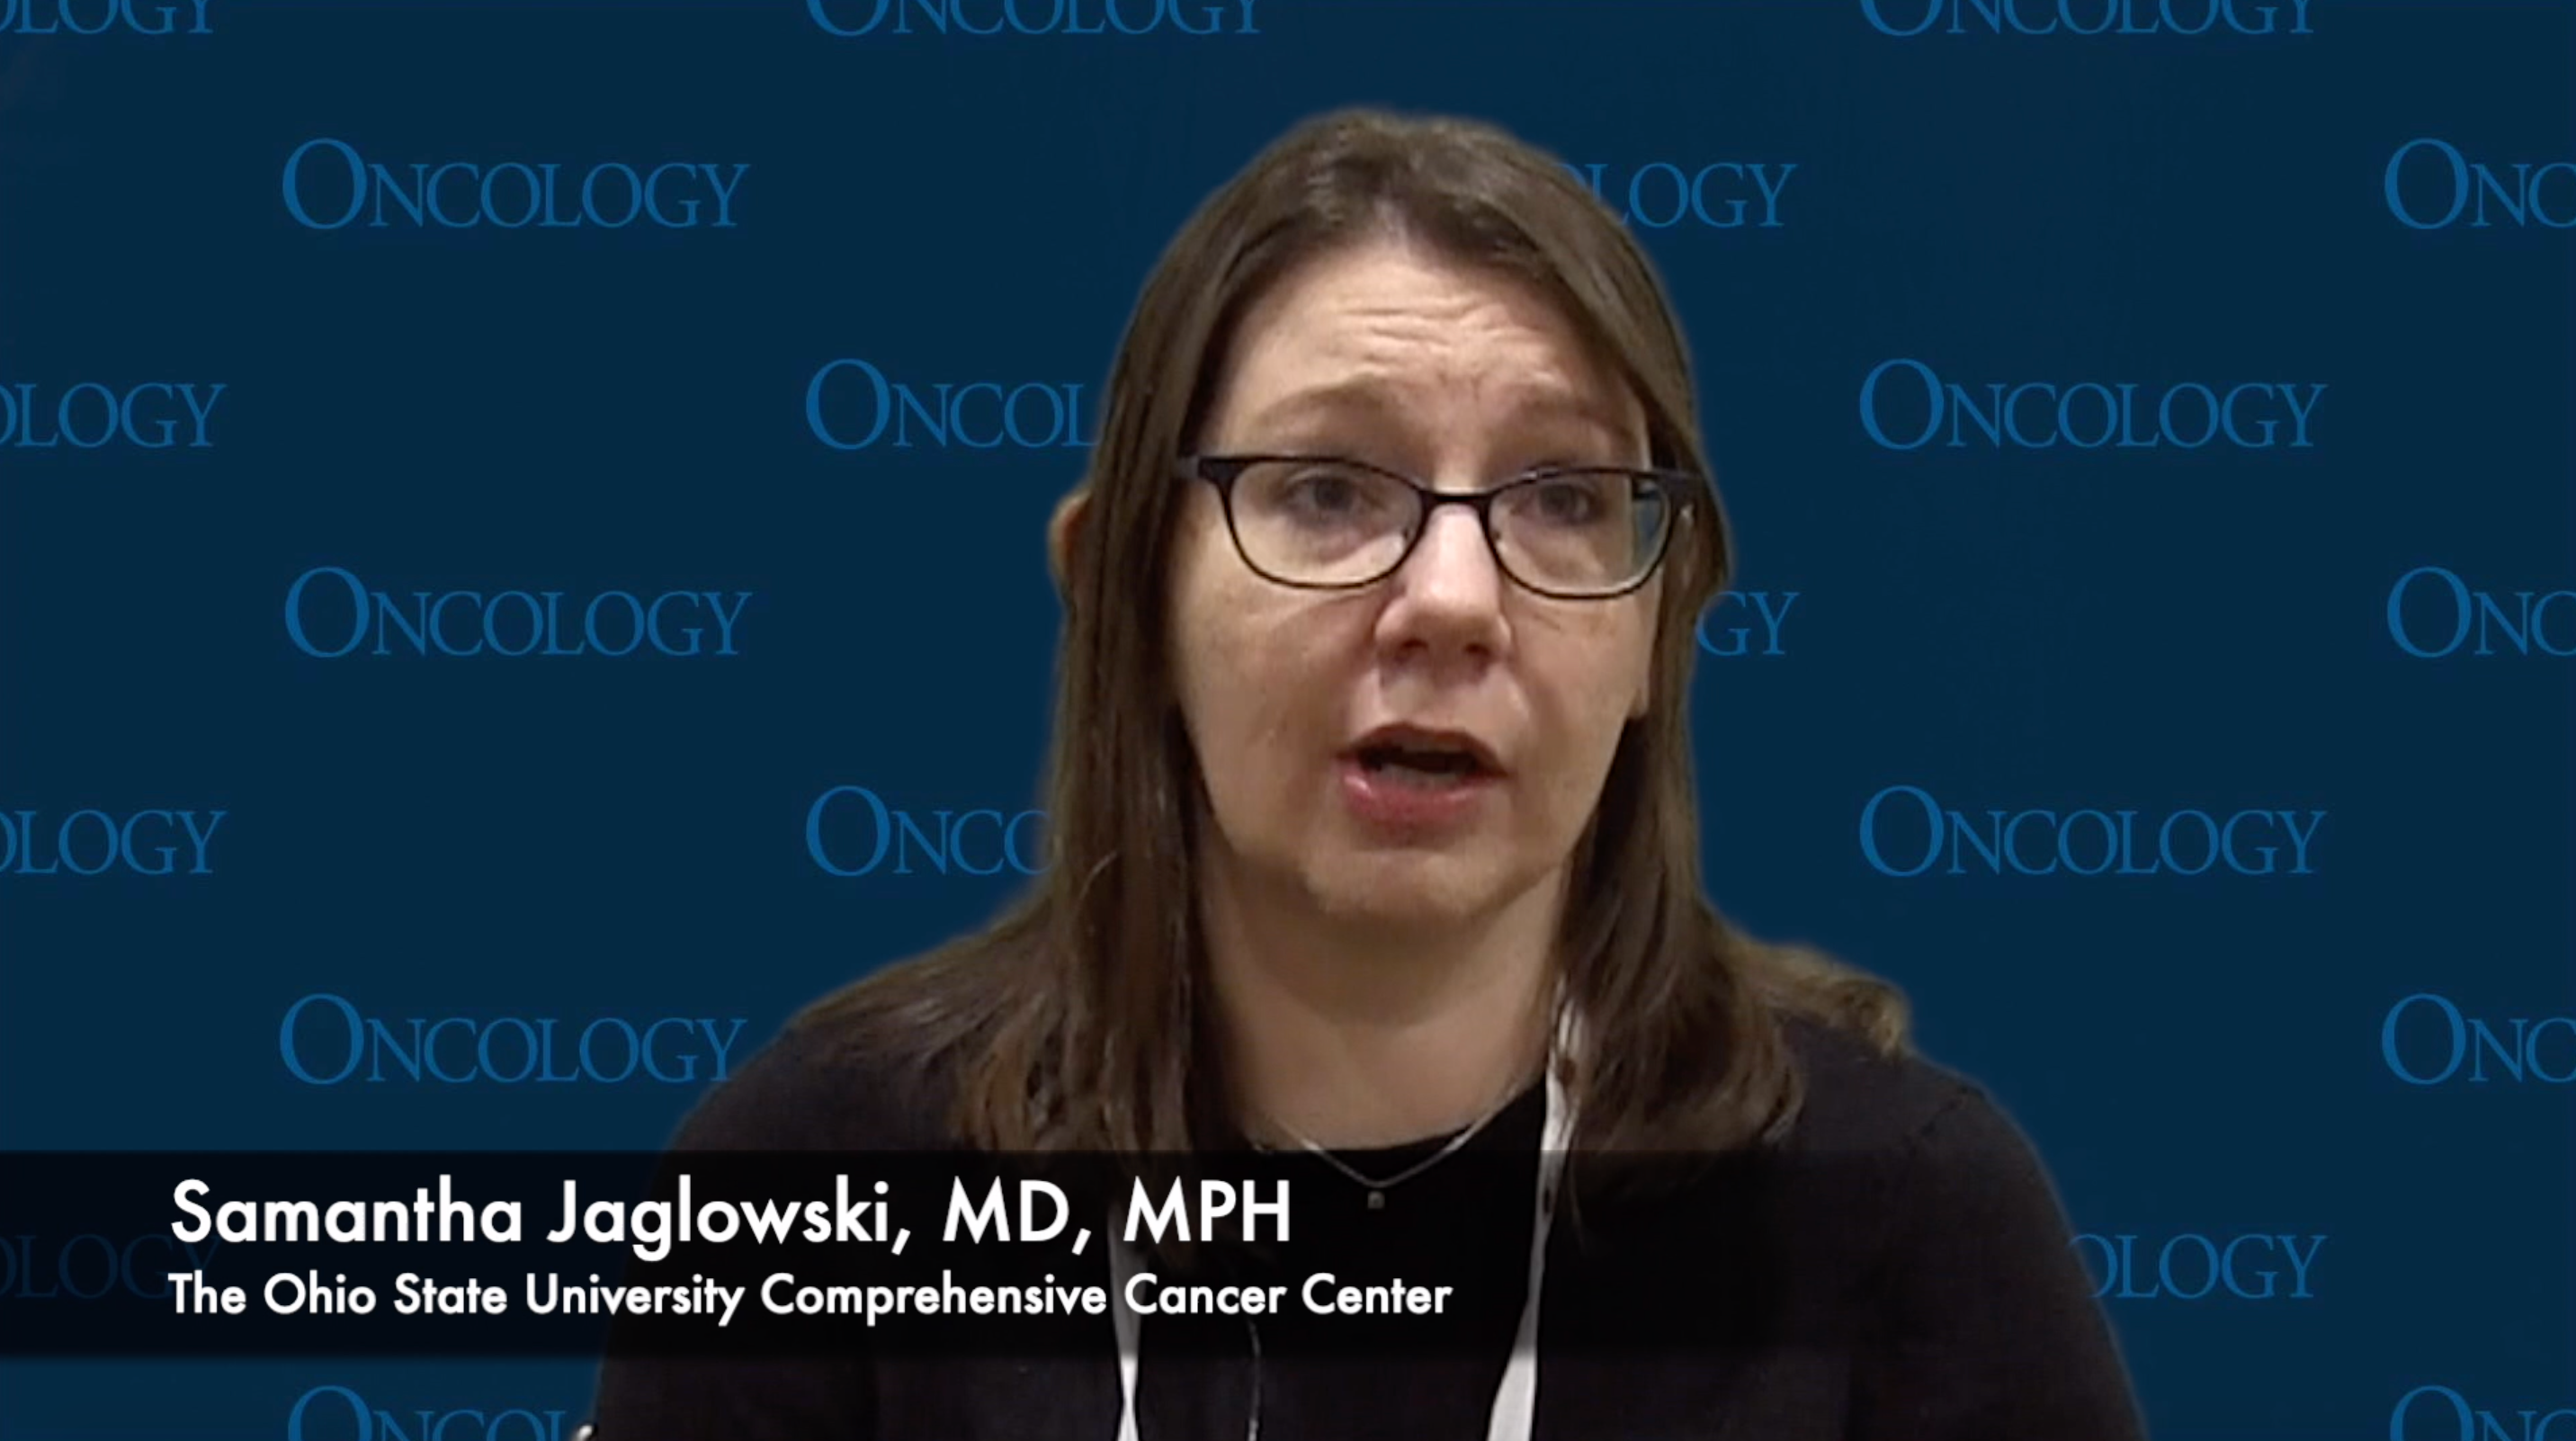 Samantha Jaglowski, MD, MPH, Discusses Implications of Tisagenlecleucel for Patients with DLBCL